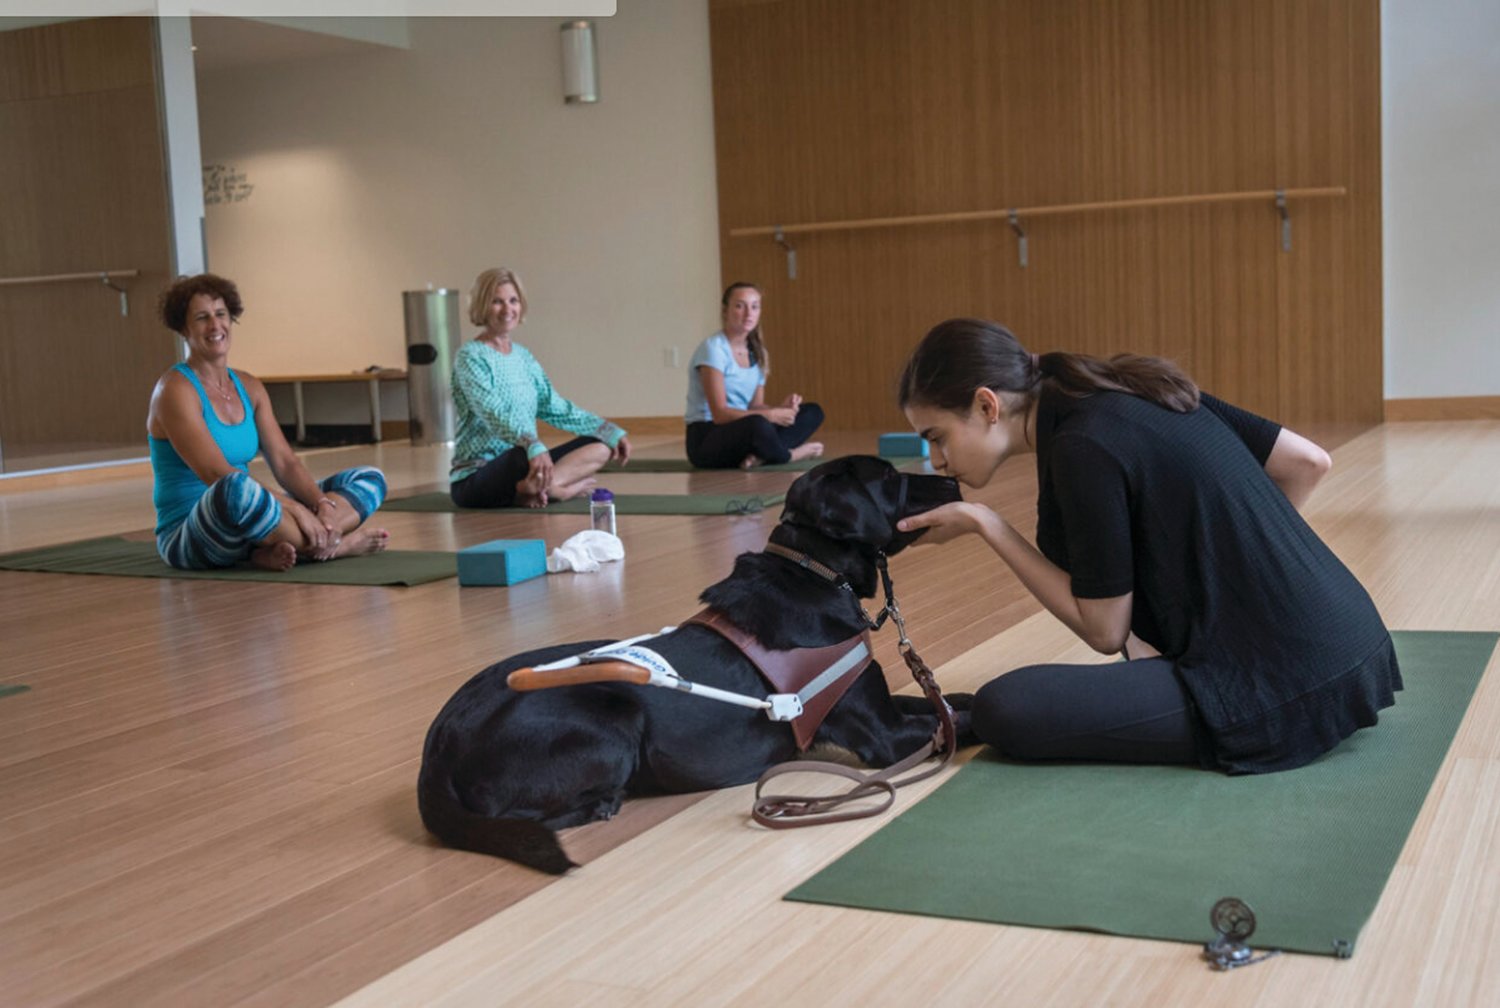 PEACE OF MIND: Aria conducts at a yoga class at URI in 2017 with her guide dog, Ingrid, at her side.